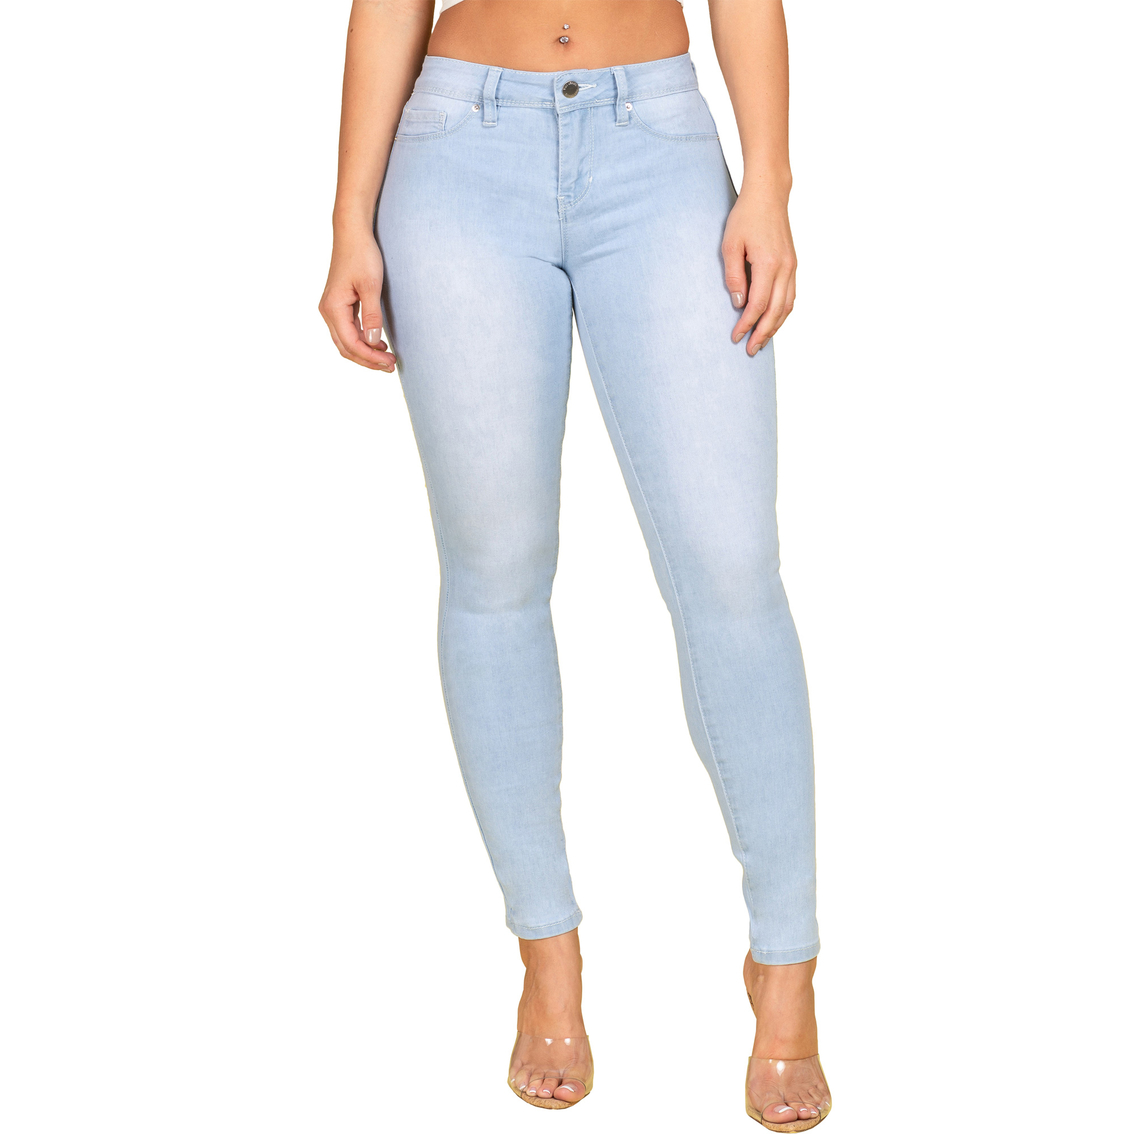 Ymi Juniors 9in Mid Rise Skinny Jeans | Jeans | Clothing & Accessories ...